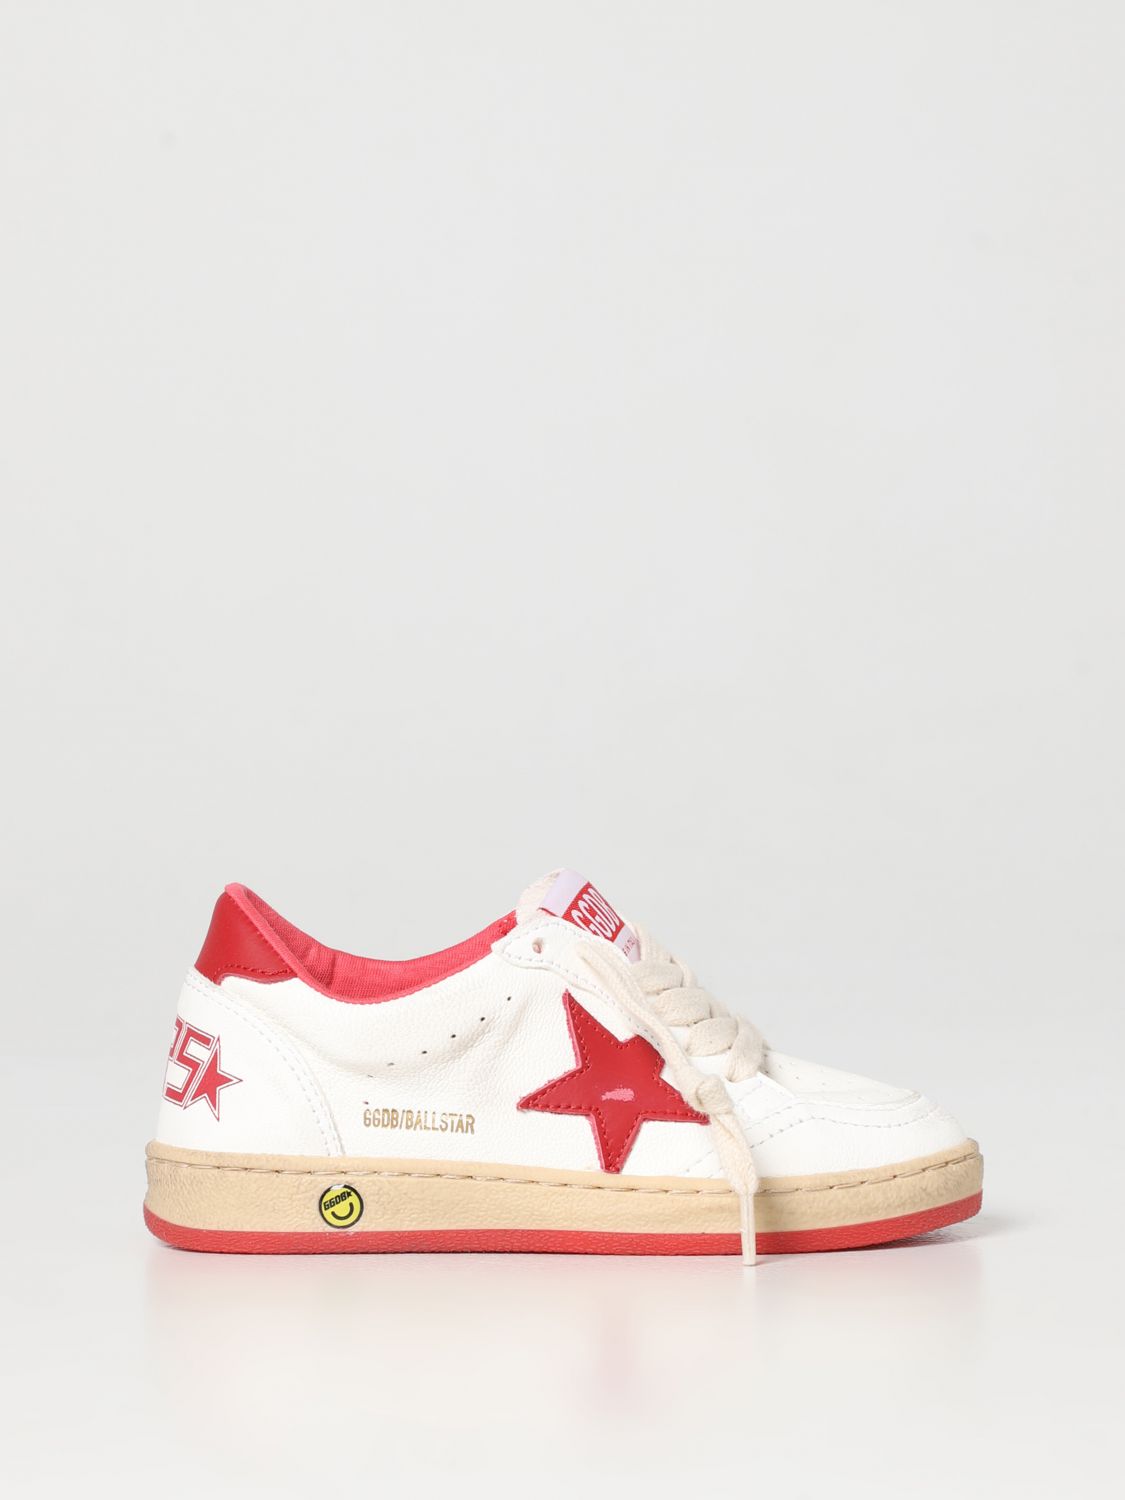 GOLDEN GOOSE BALL STAR GOLDEN GOOSE SNEAKERS IN USED NAPPA LEATHER,D87502001